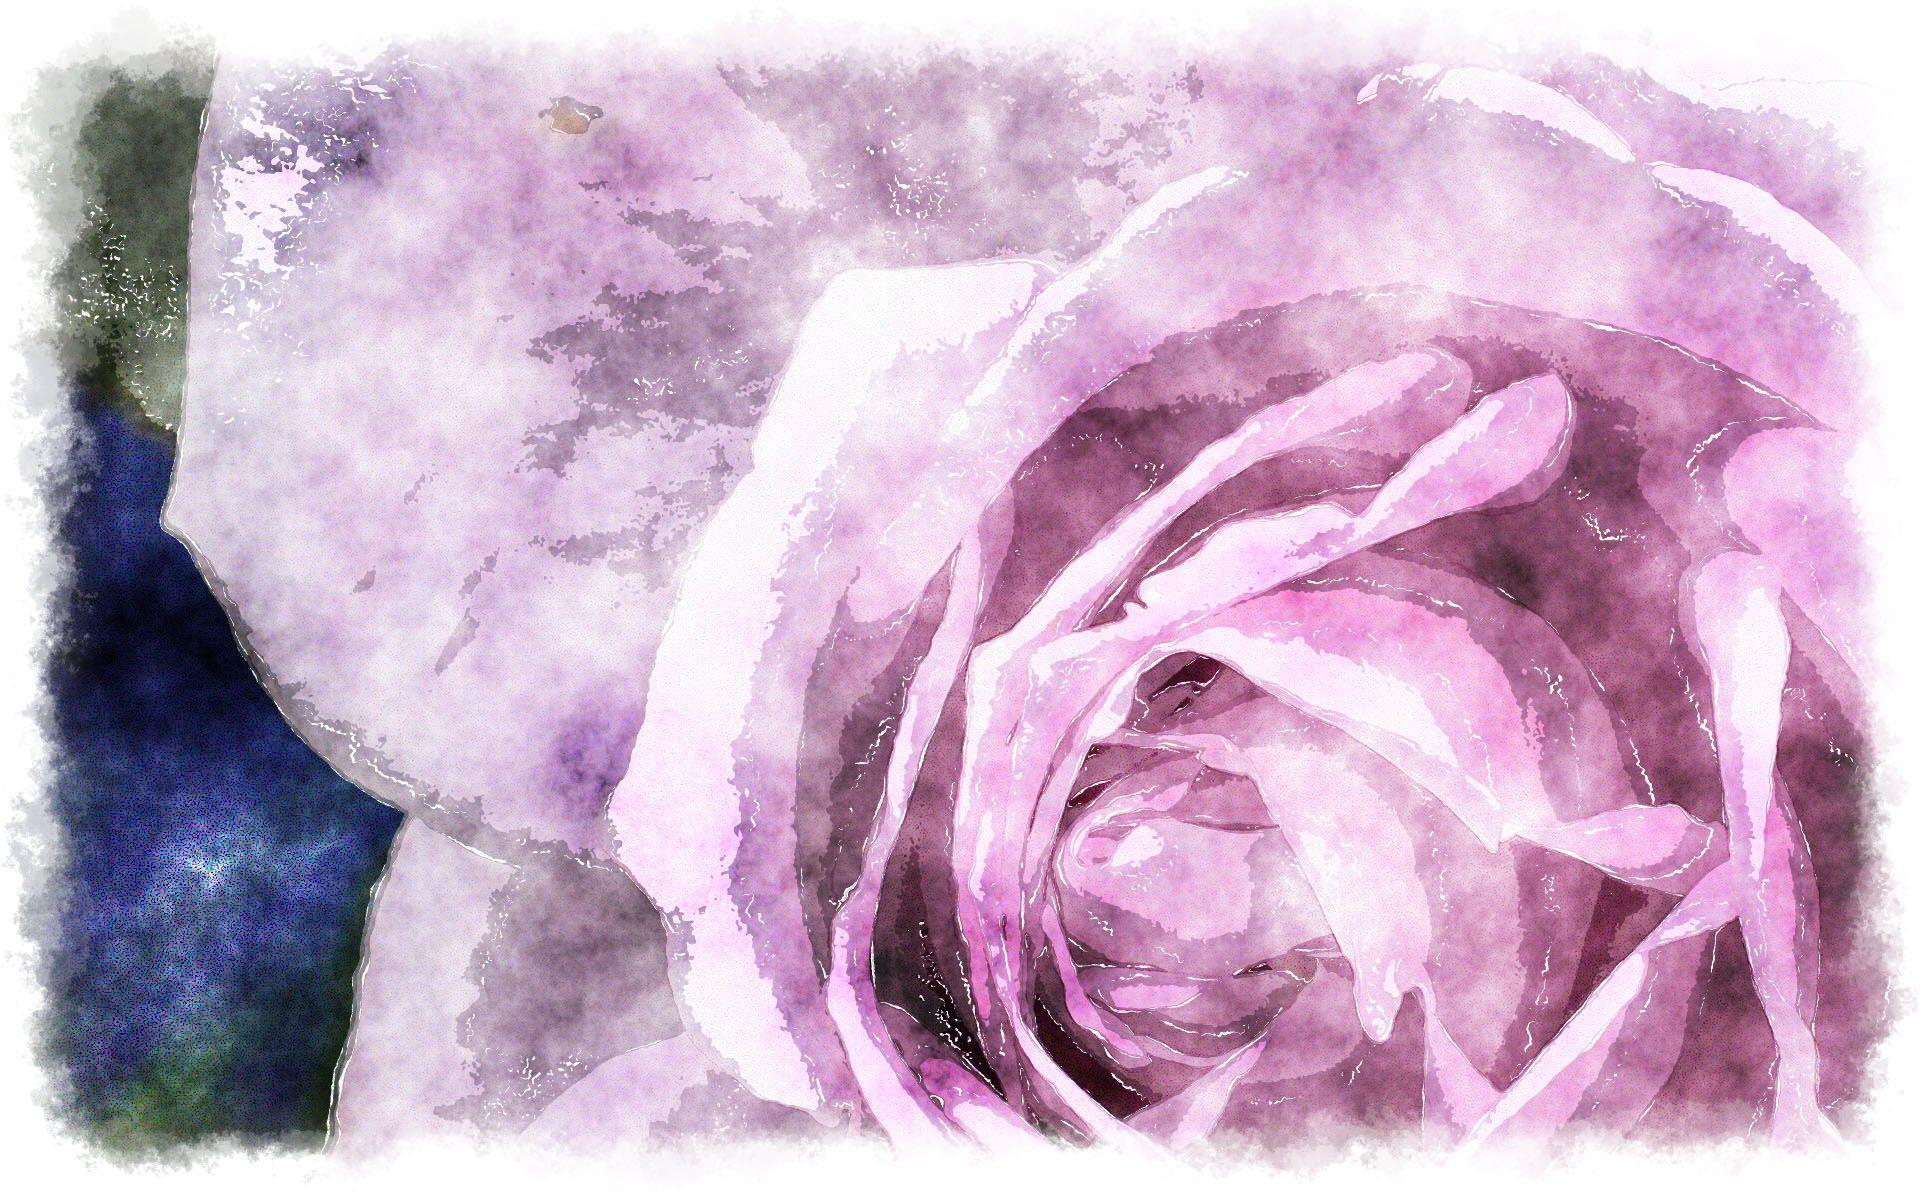 watercolor rose wallpaper - Image And Wallpaper free to